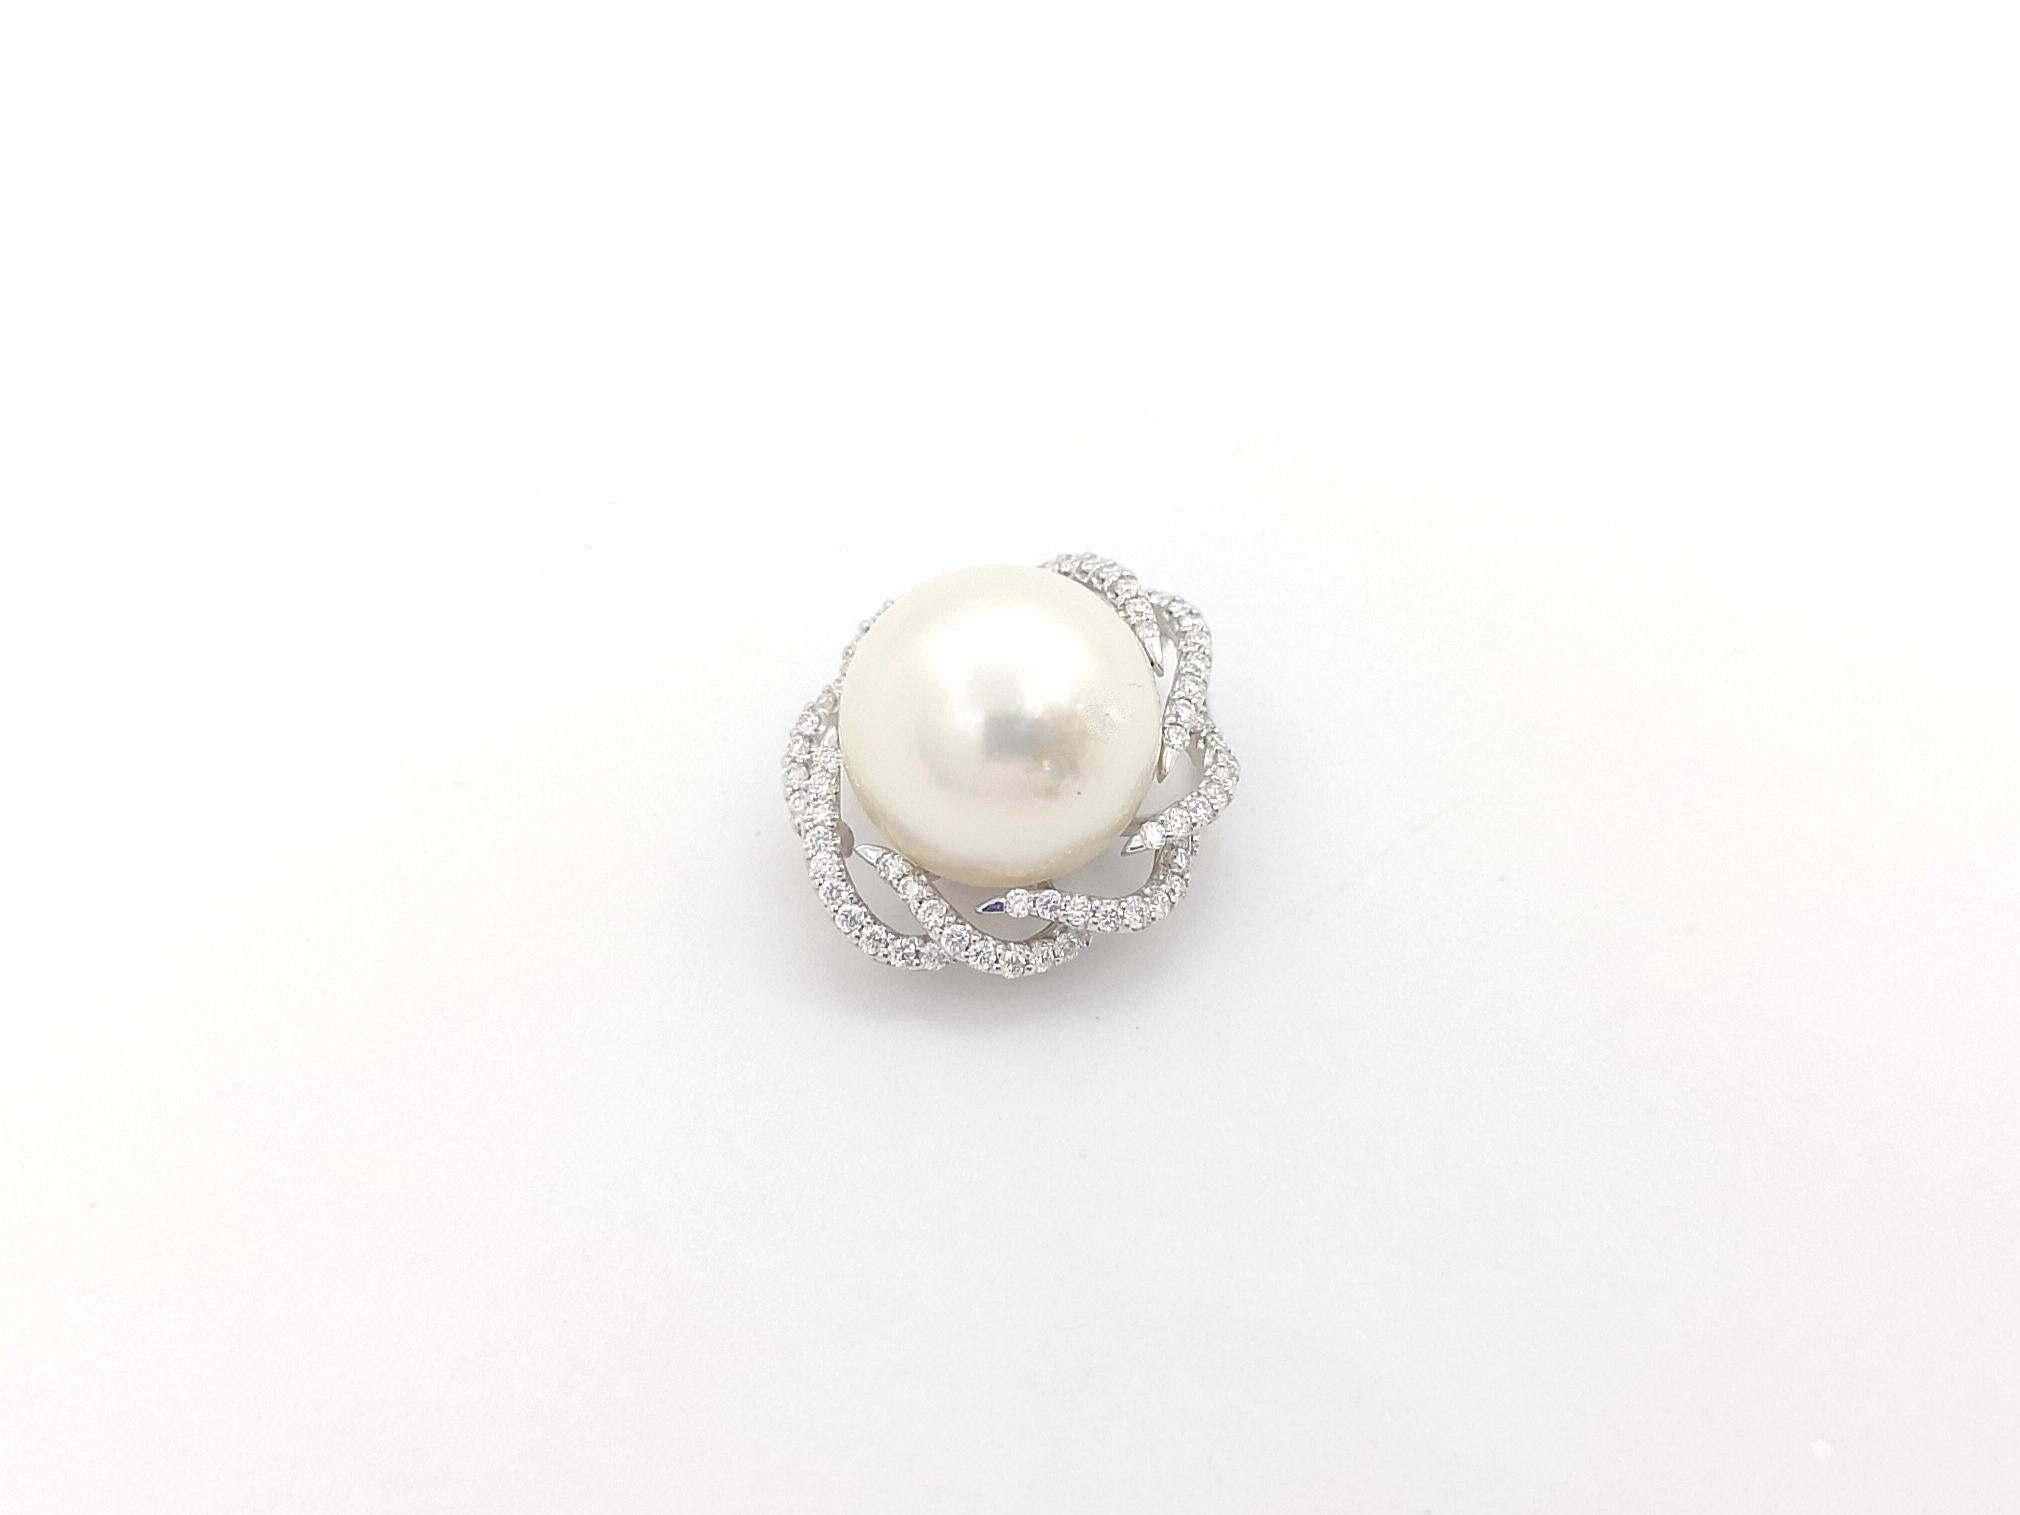 Brilliant Cut South Sea Pearl with Diamond 0.50 carat Pendant set in 18K White Gold Settings For Sale